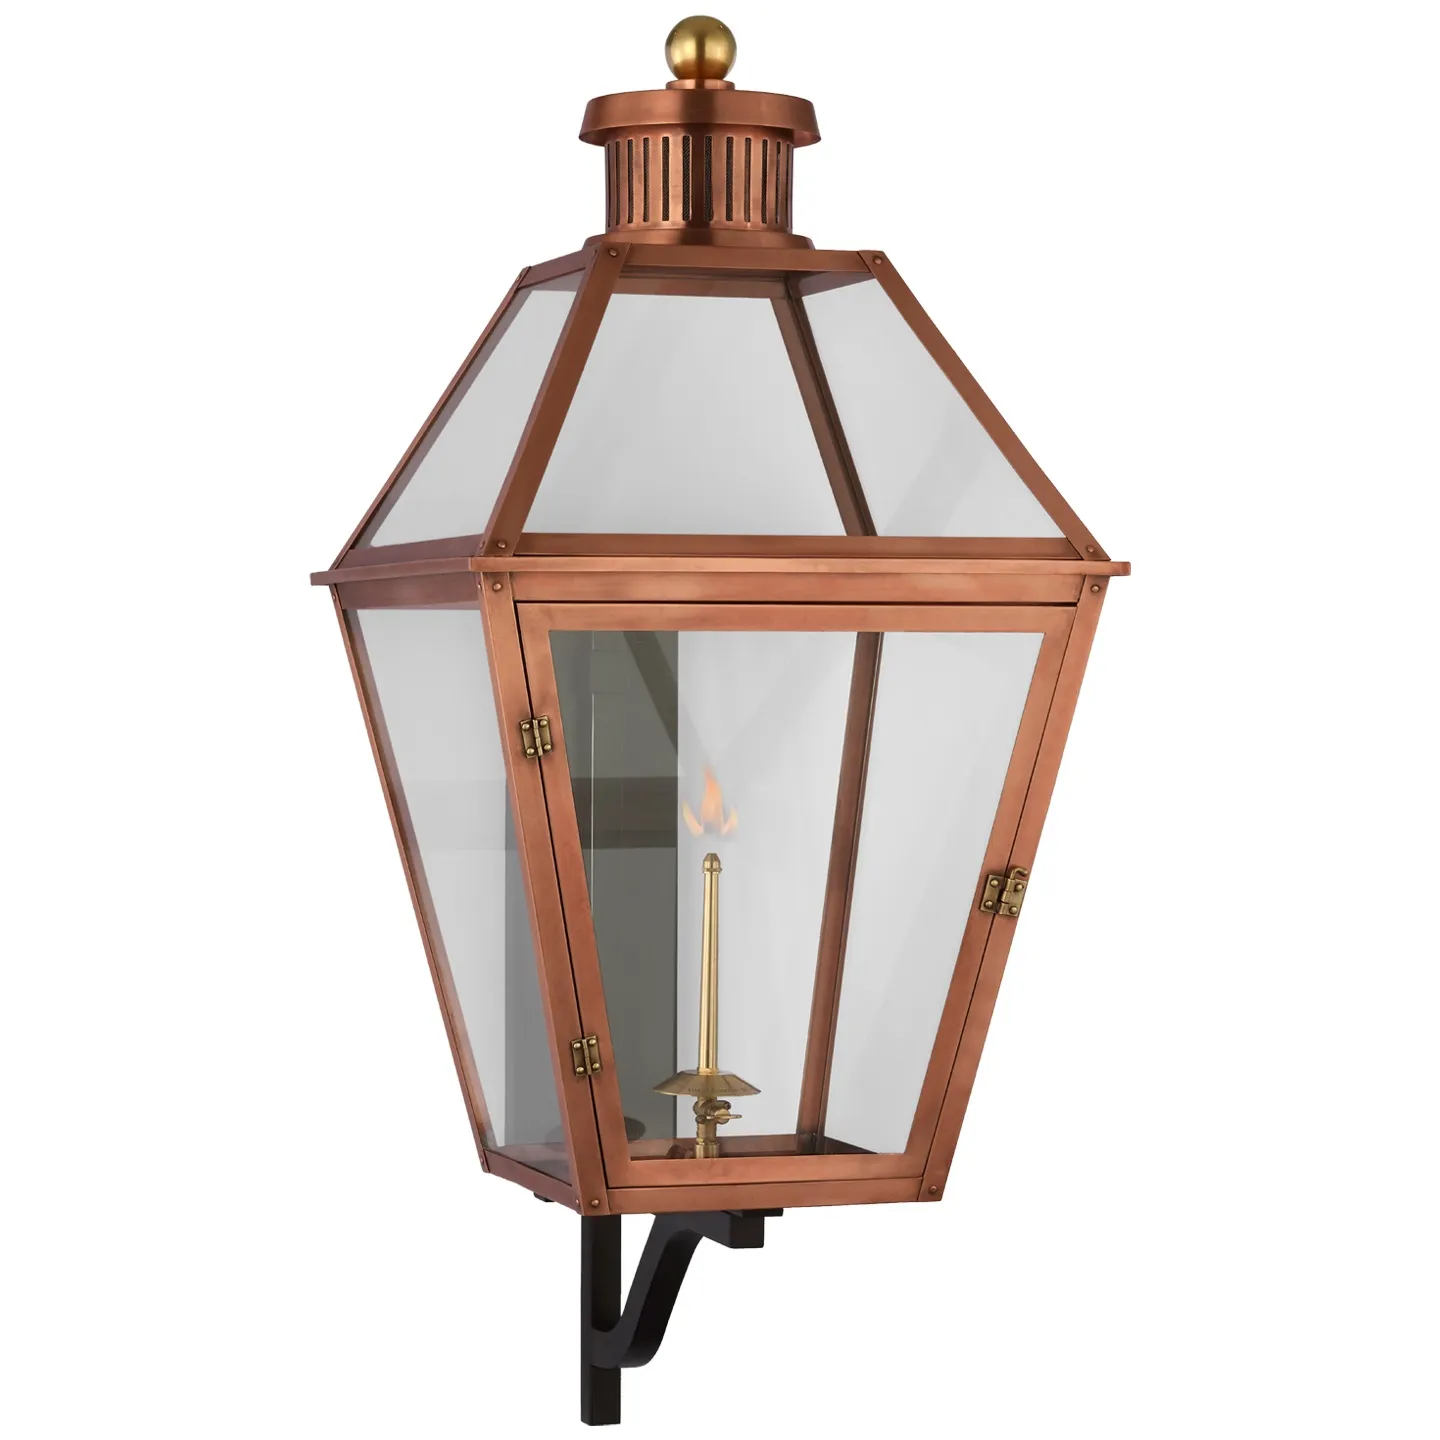 Stratford XL Bracketed Gas Wall Lantern in Soft Copper with Clear Glass